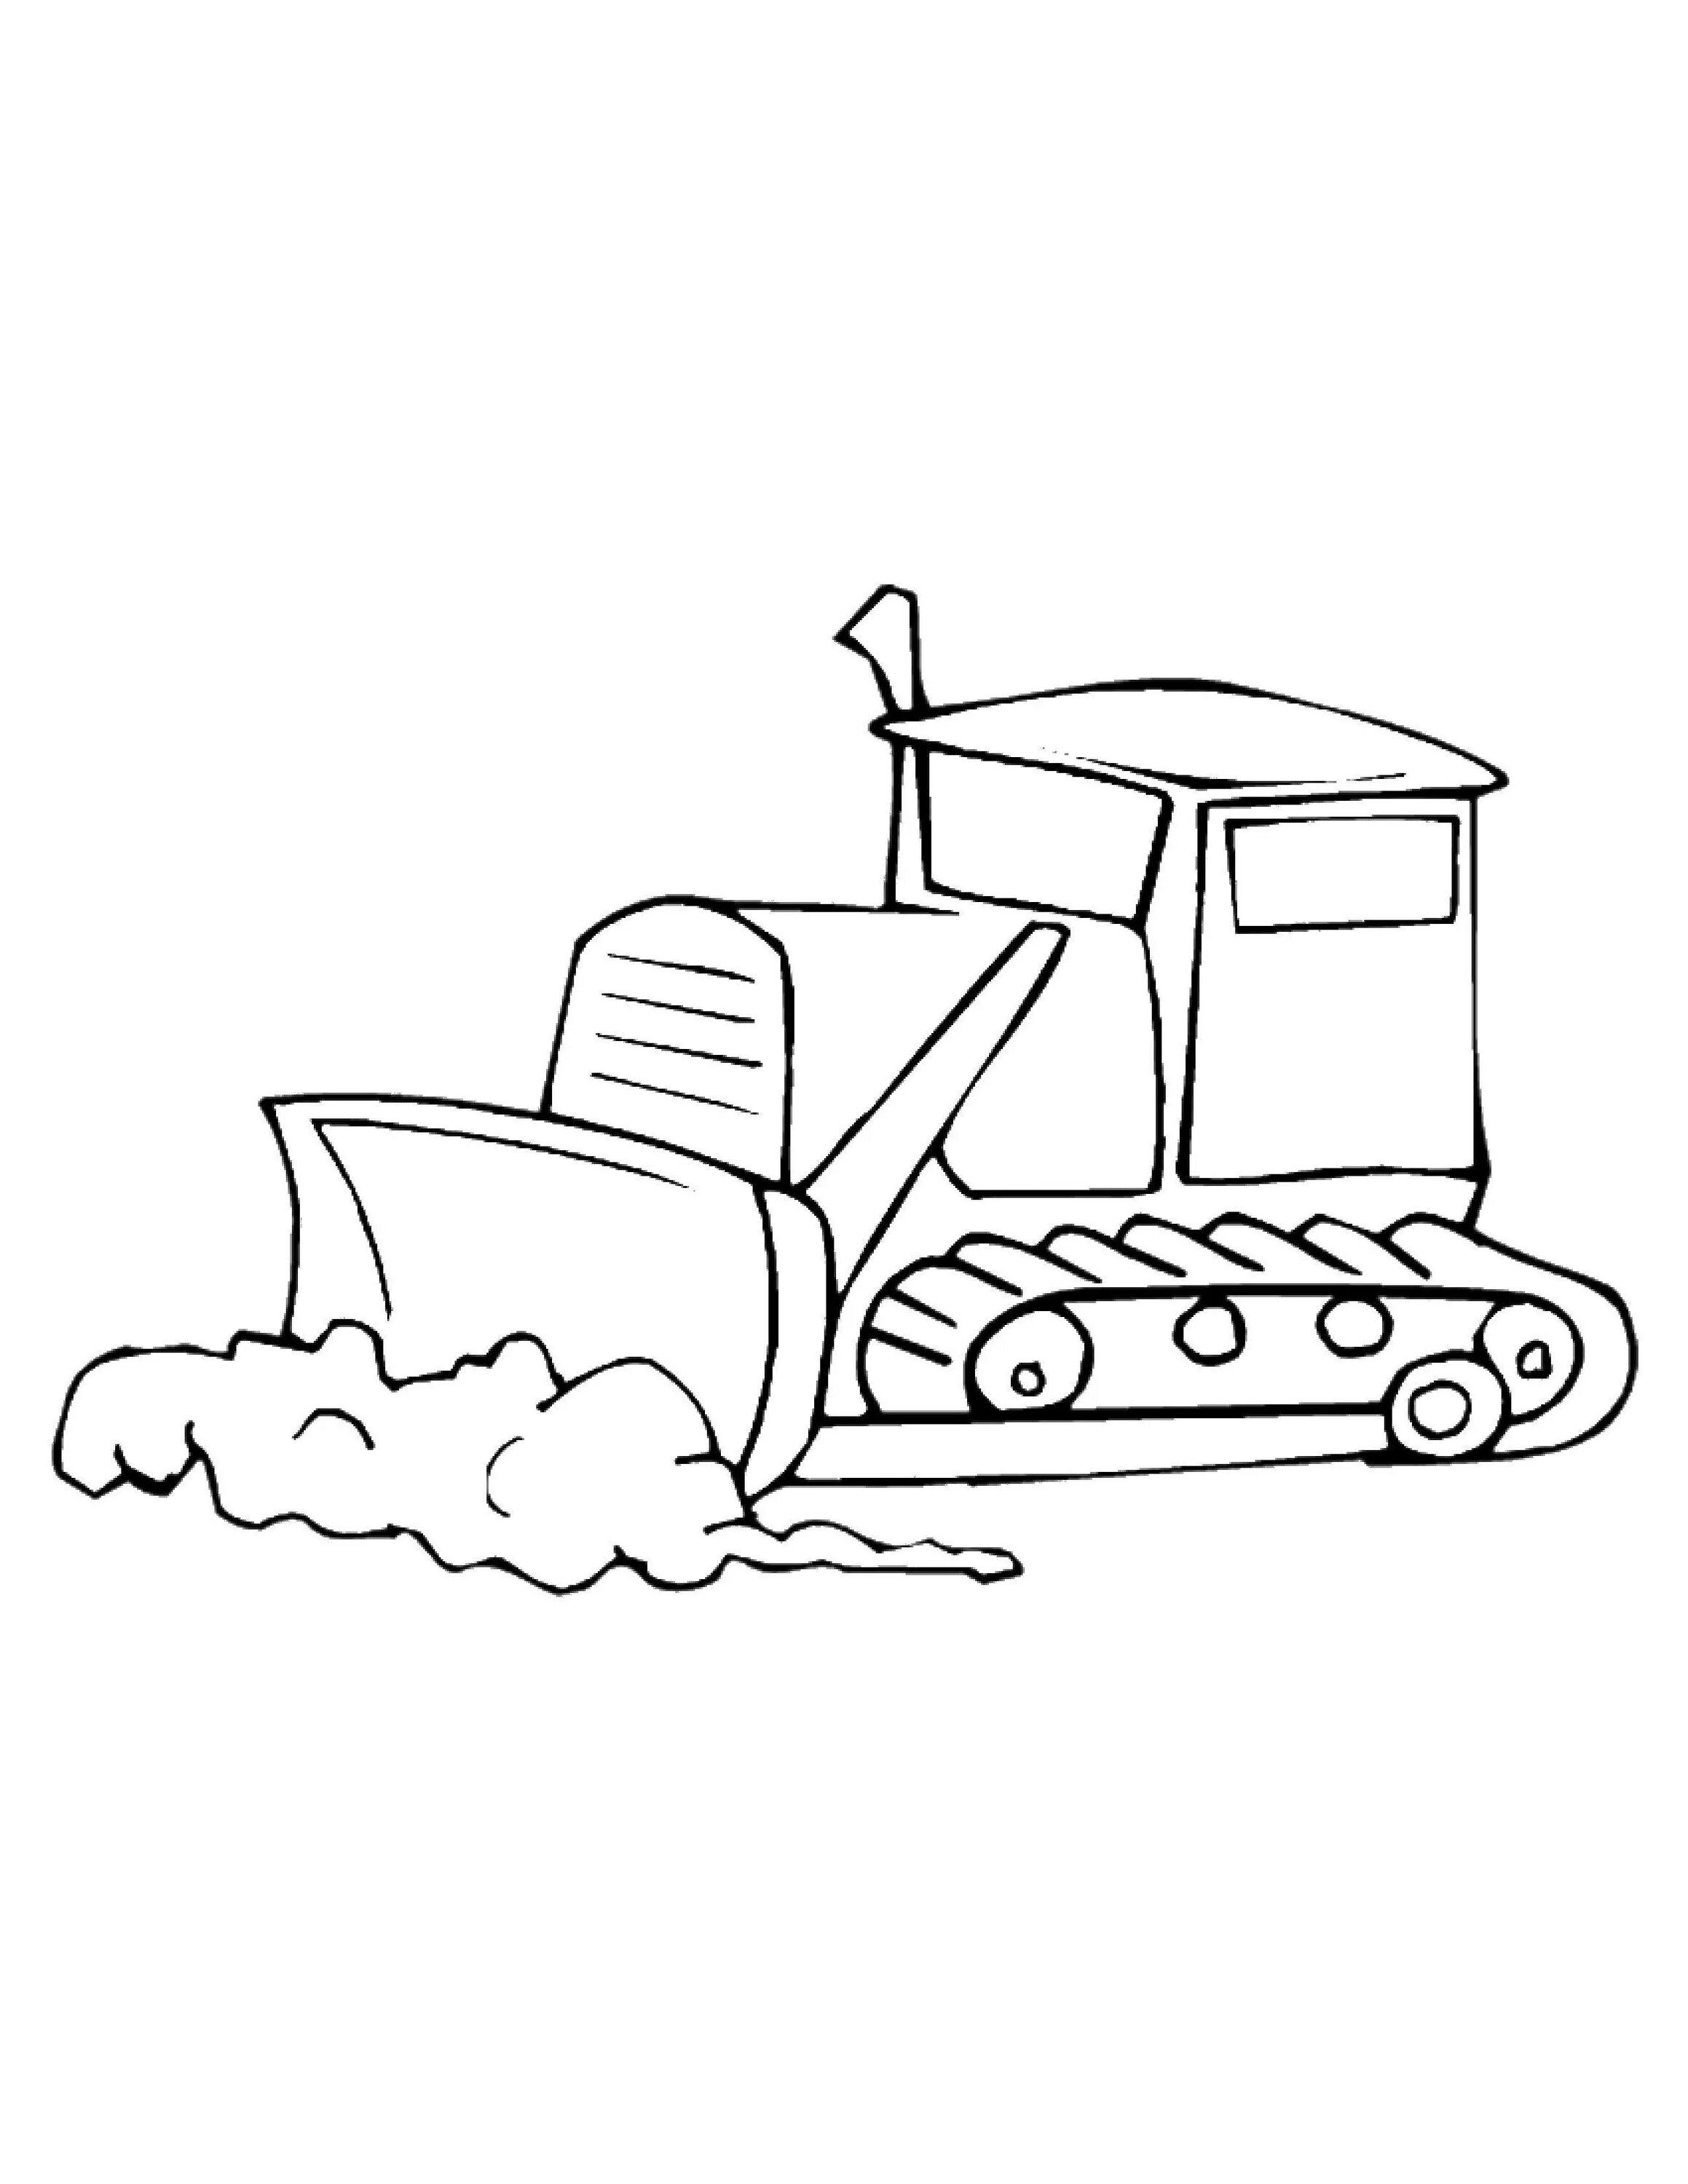 Intricate snowplow coloring page